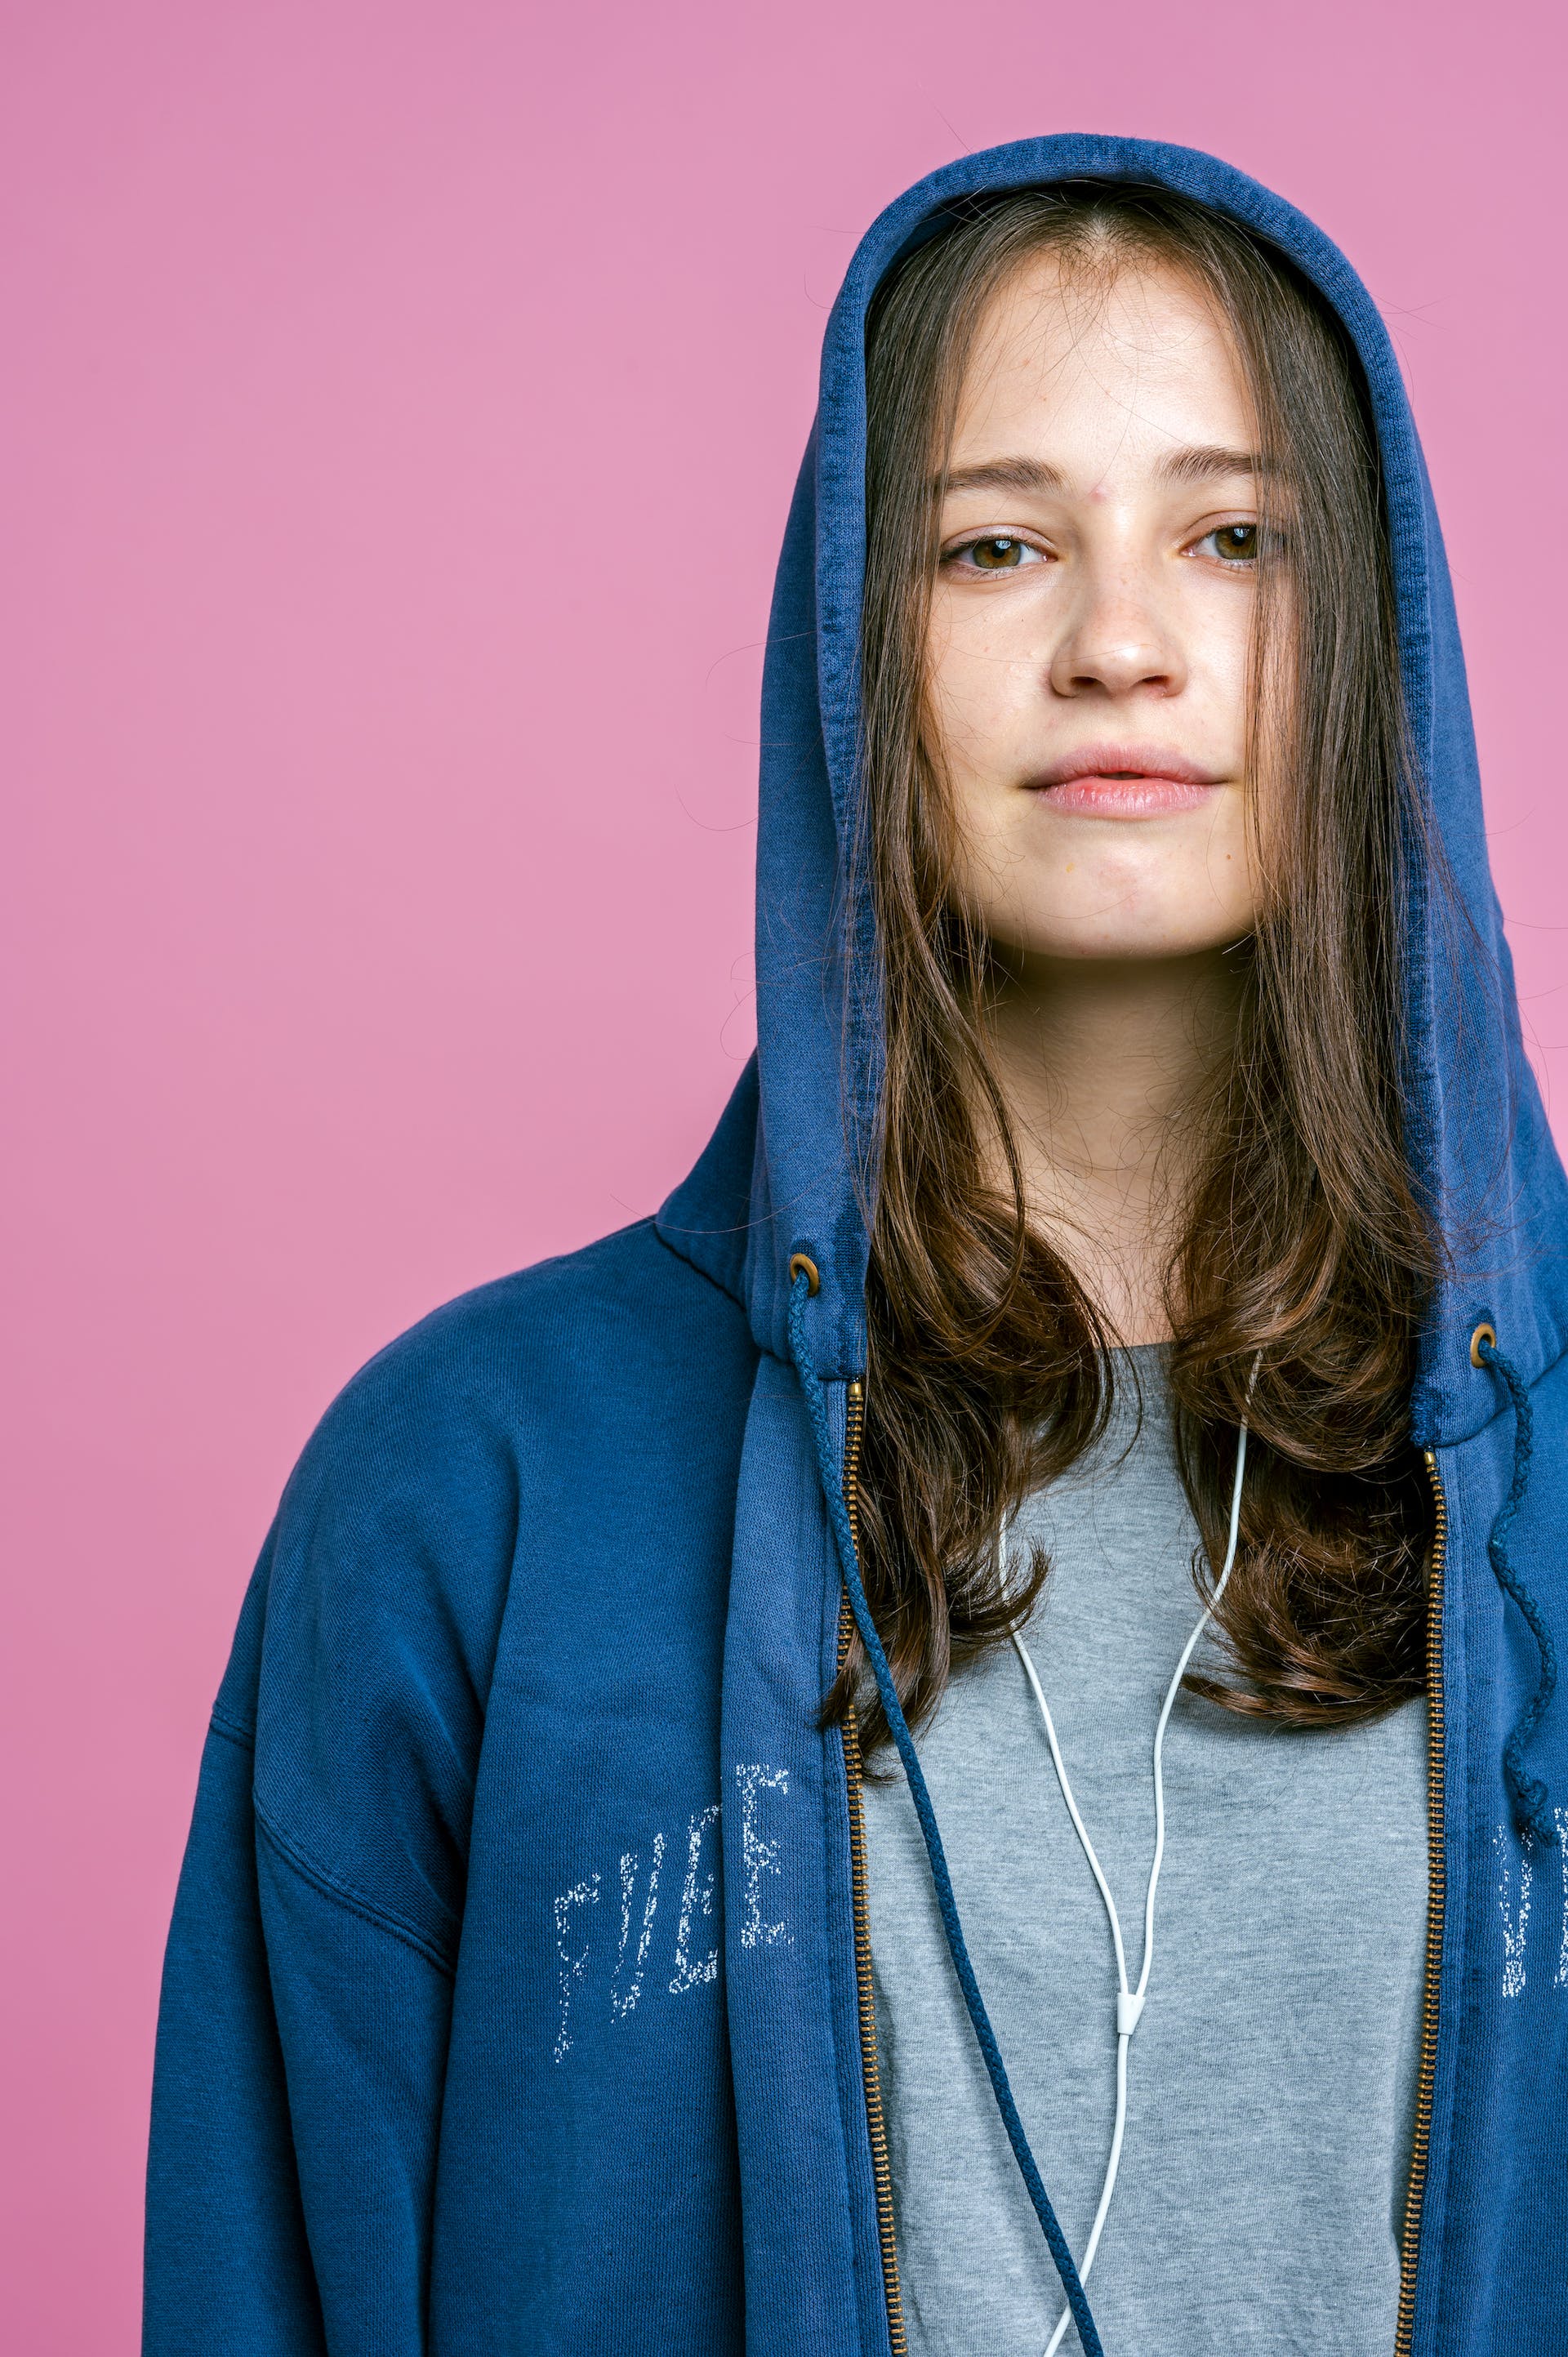 Young woman in an oversized hoodie | Source: Pexels